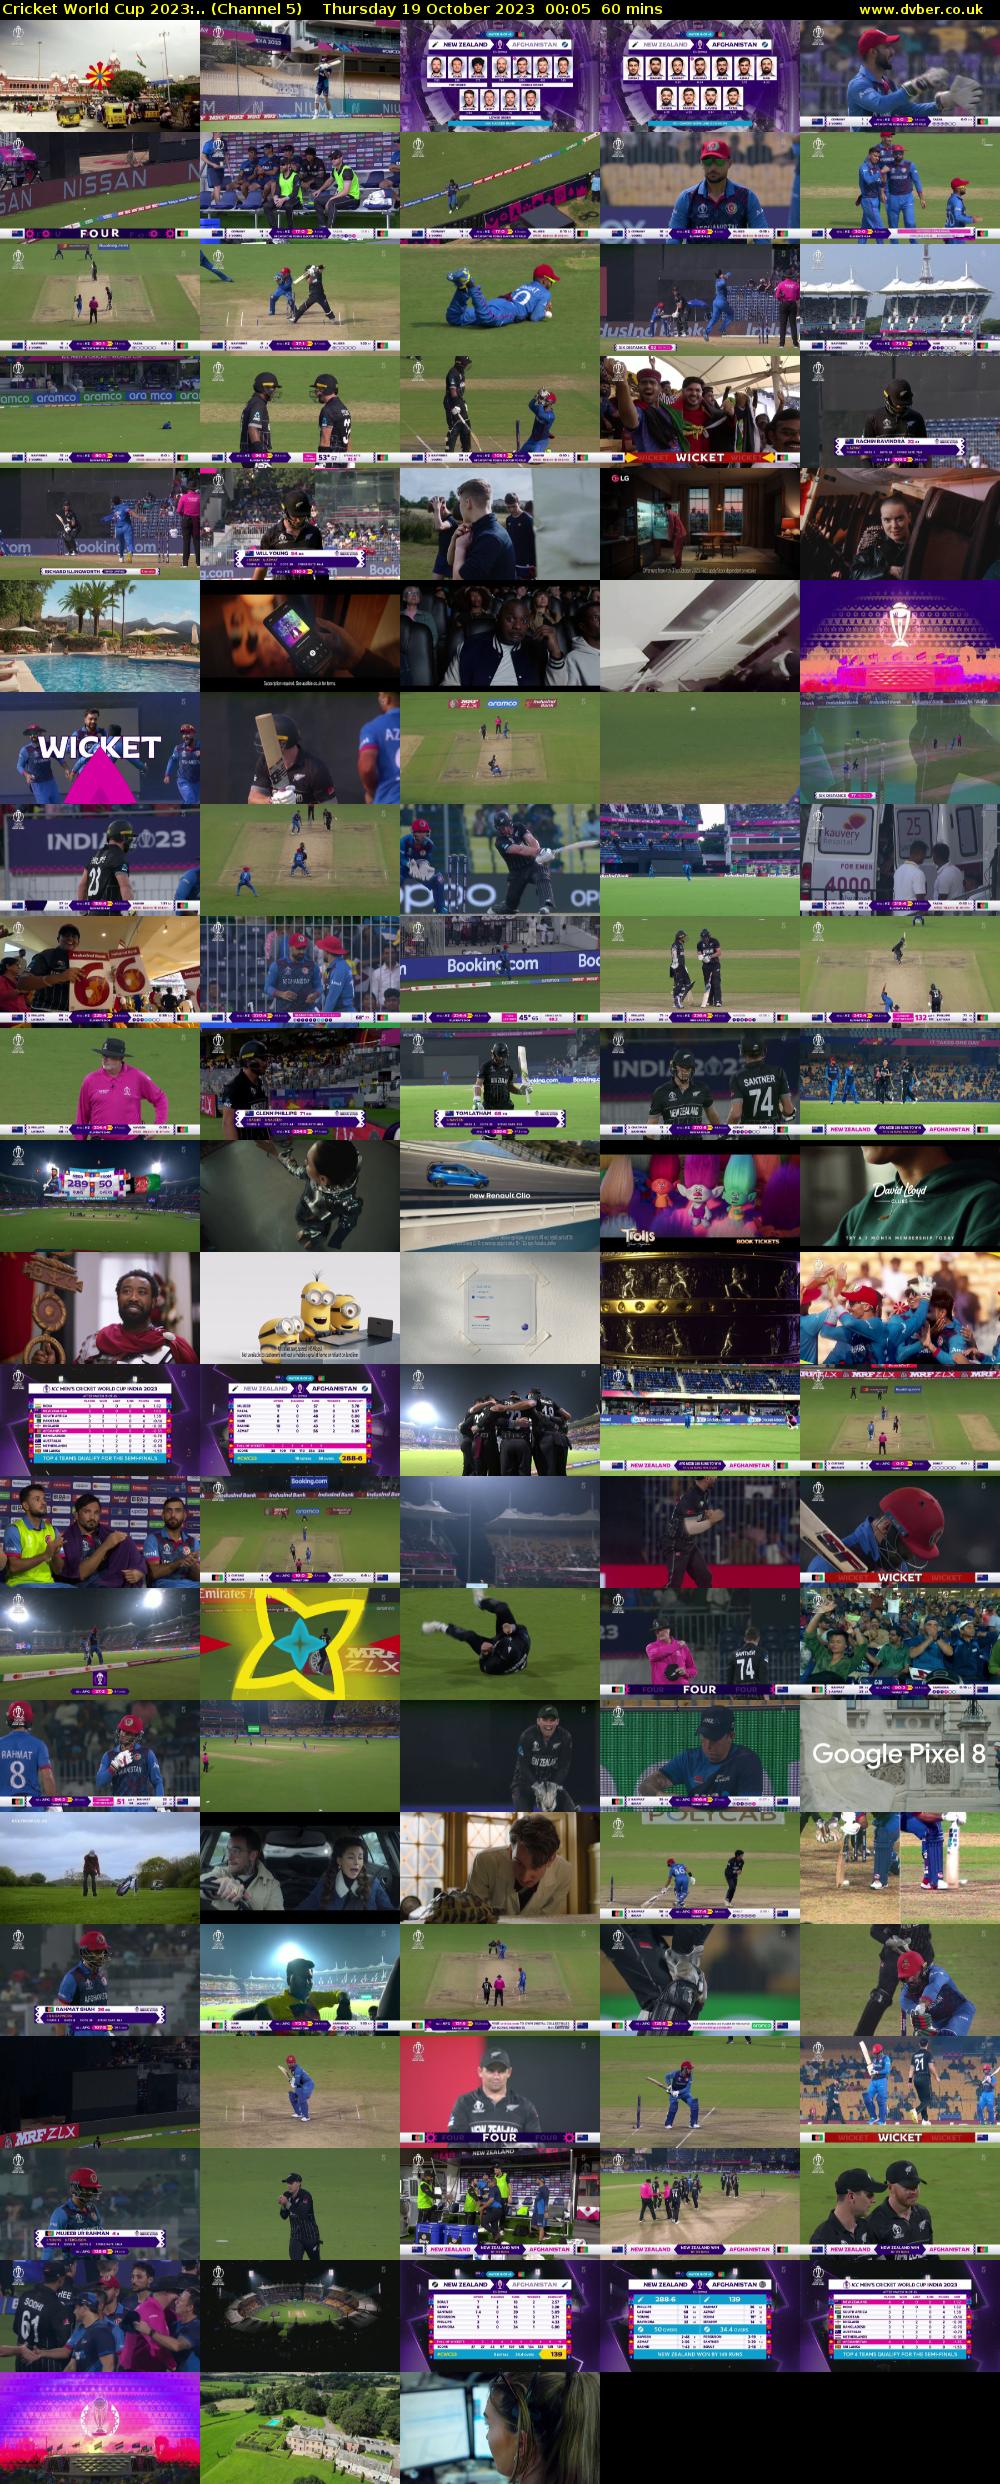 Cricket World Cup 2023:.. (Channel 5) Thursday 19 October 2023 00:05 - 01:05